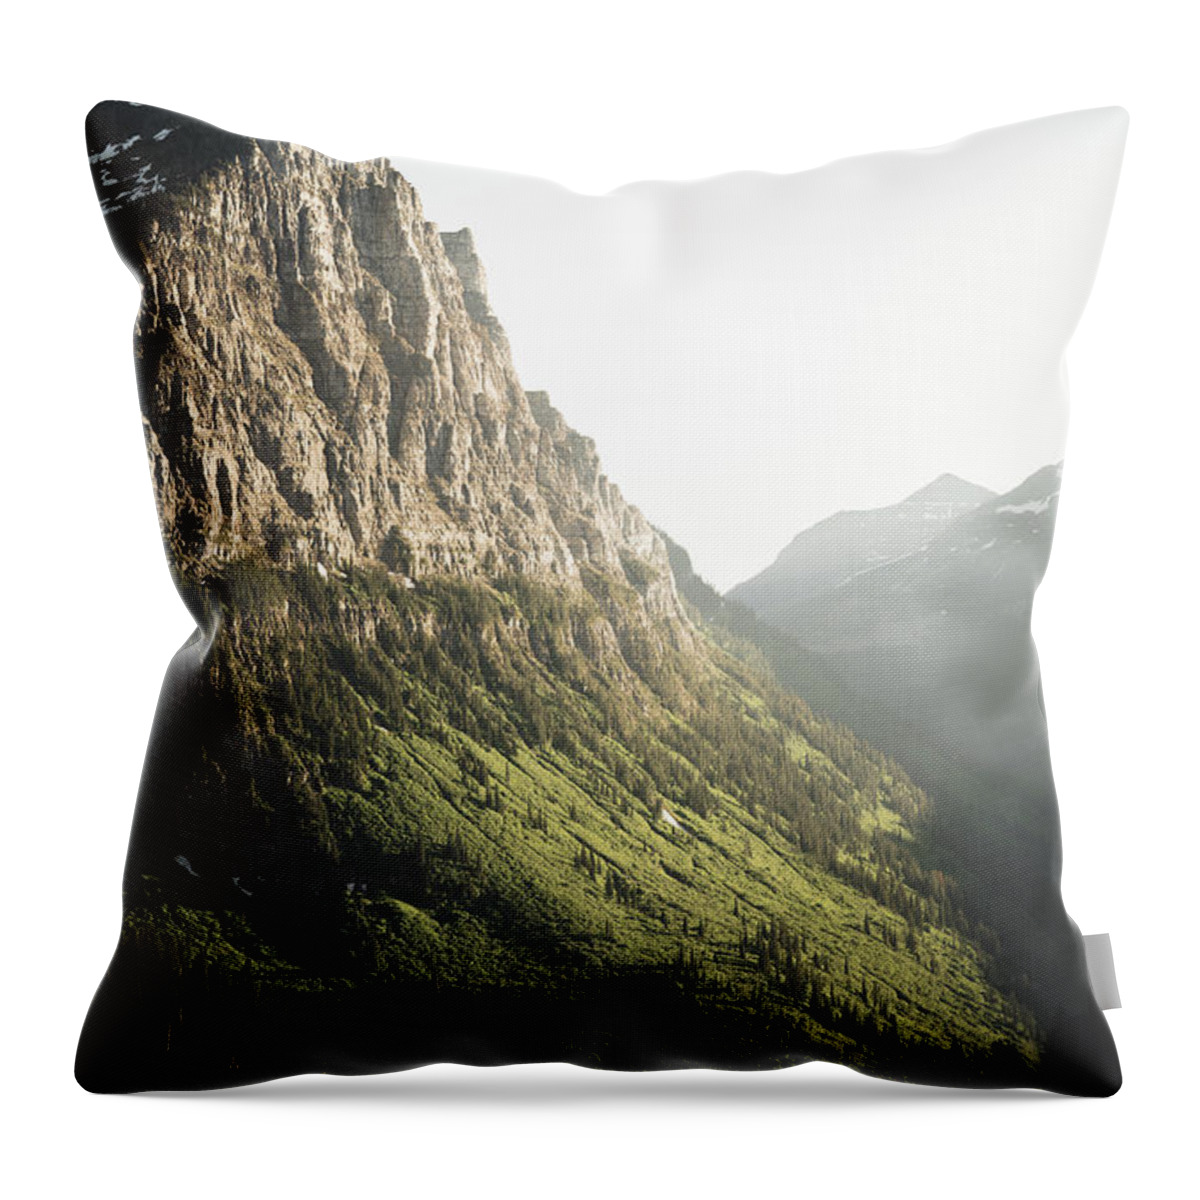  Throw Pillow featuring the photograph Mount Oberlin by William Boggs